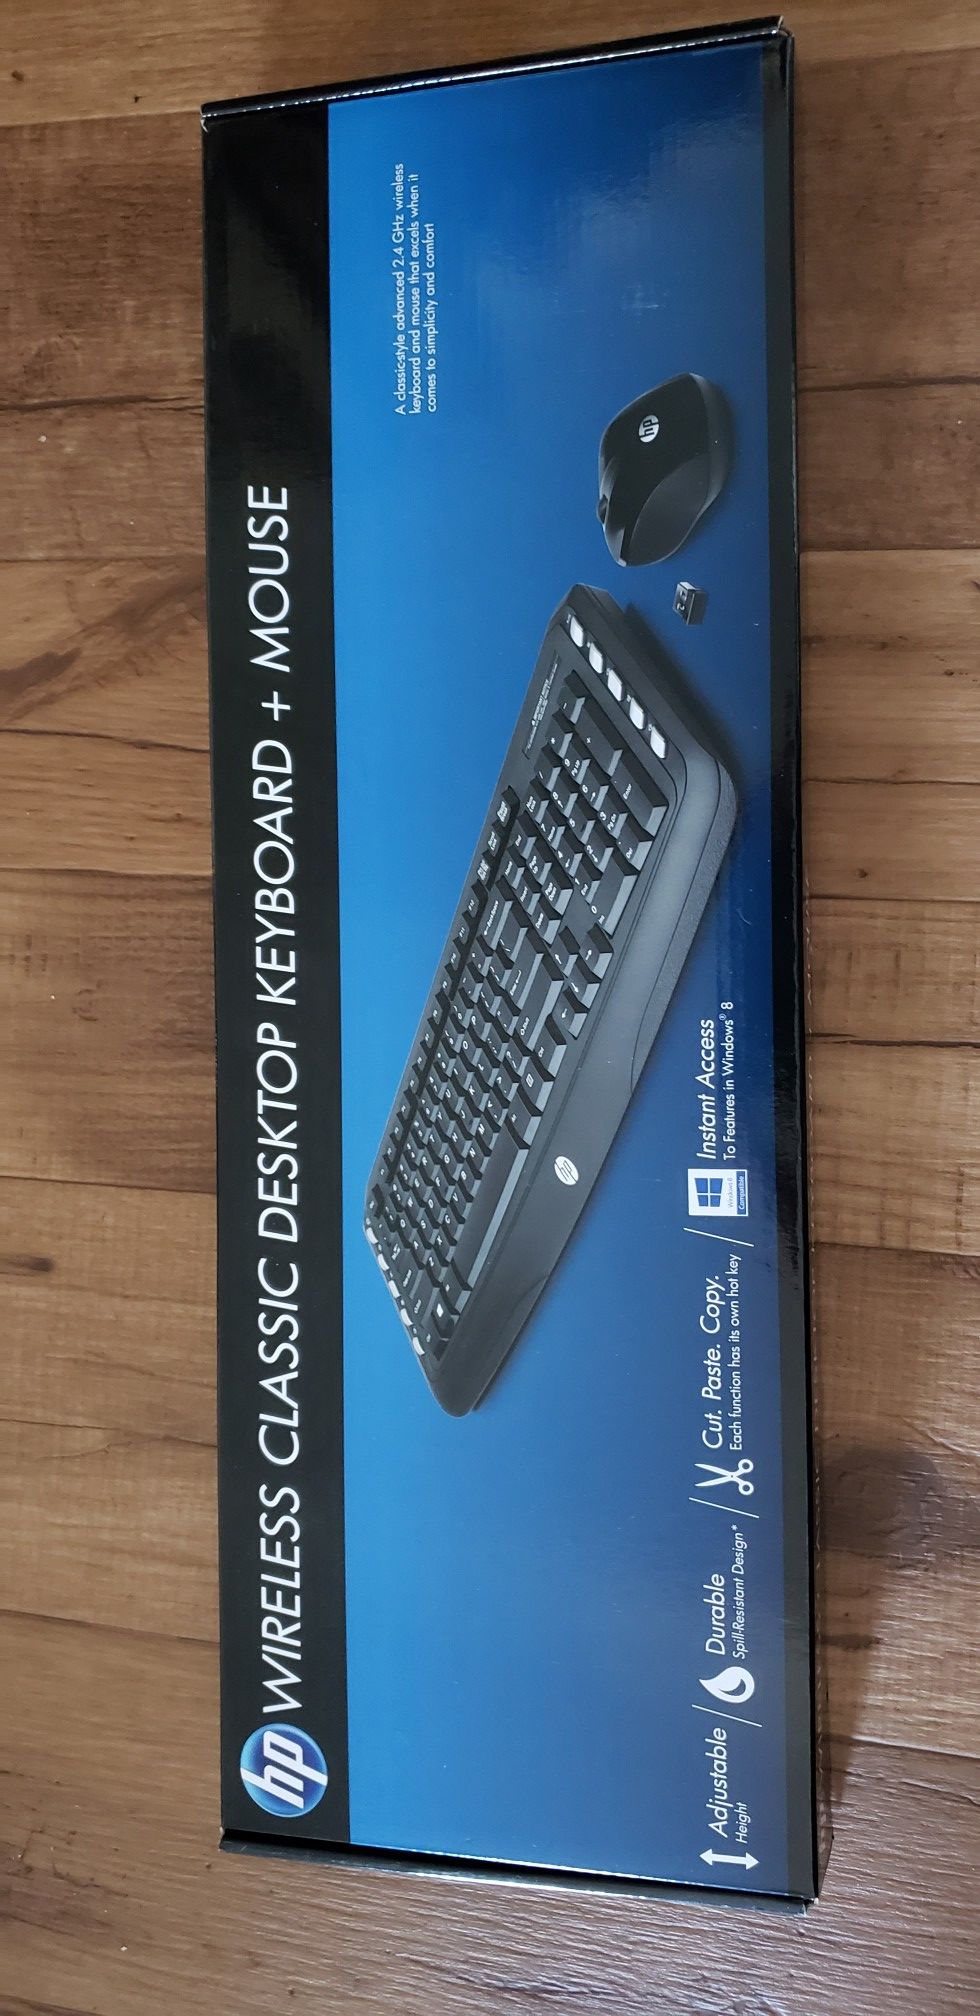 Hp wireless keyboard and mouse.